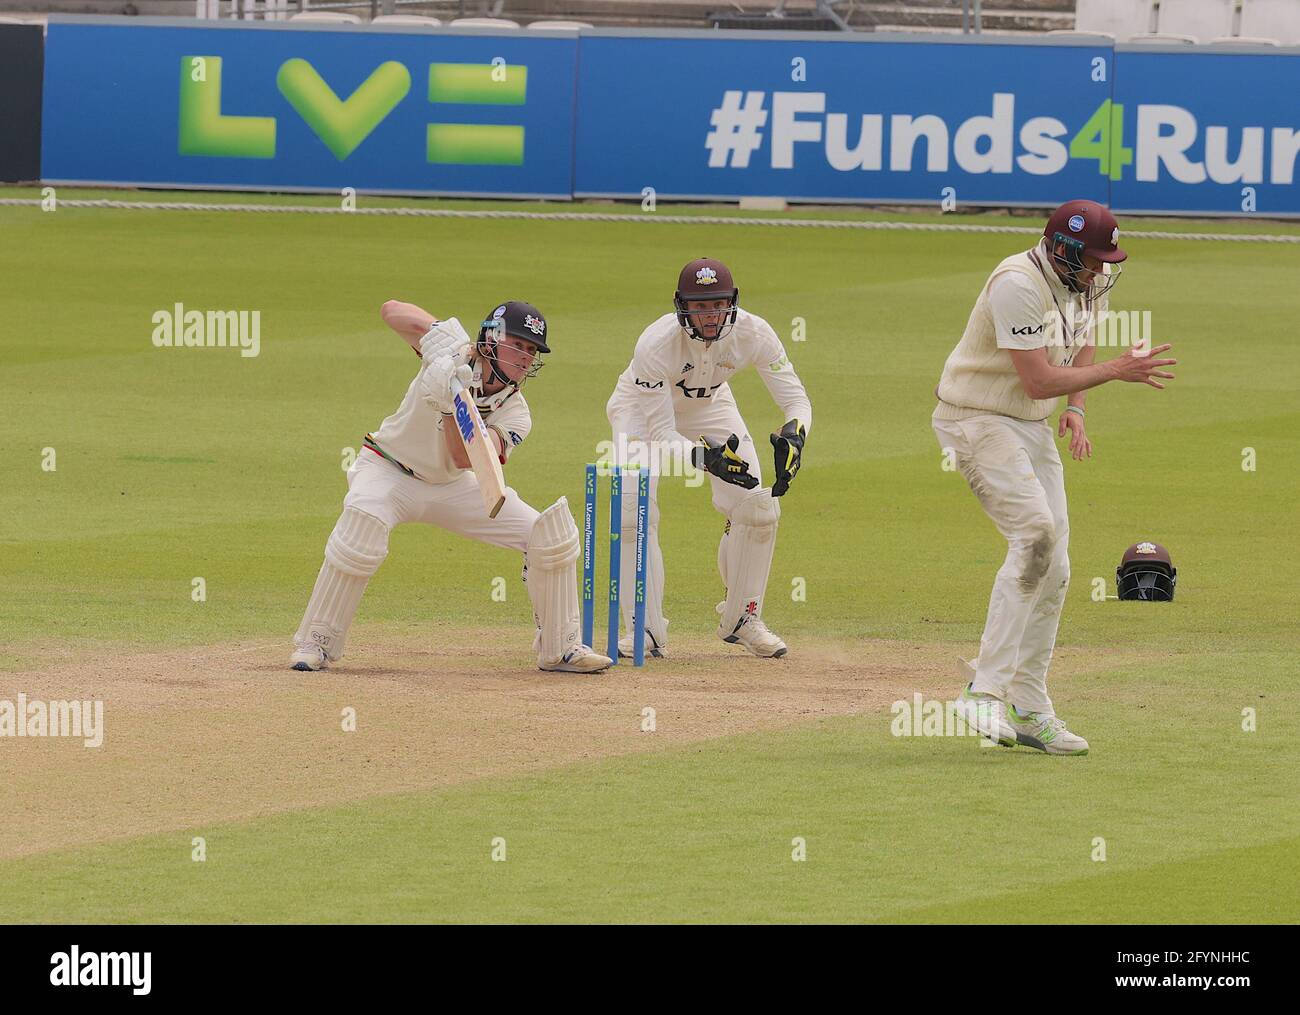 London, UK. 29 May, 2021. London, UK. Gloucestershire’s Miles Hammond batting as Surrey take on Gloucestershire in the County Championship at the Kia Oval, day three David Rowe/Alamy Live News Stock Photo